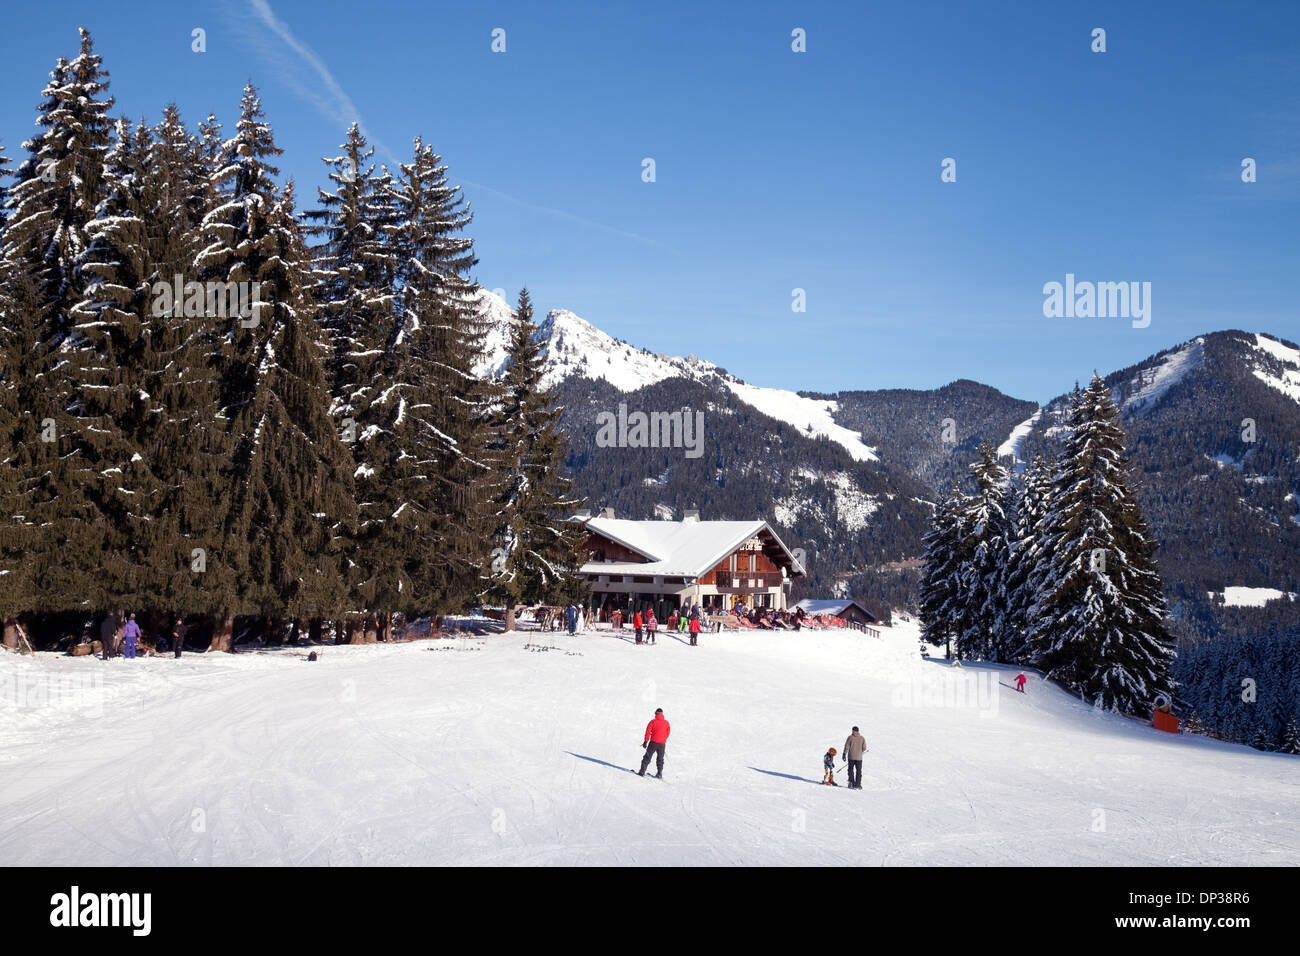 Miniature figure of a man skiing on winter snow on colorful red skis  surrounded by multiple shadows and copyspace Stock Photo - Alamy